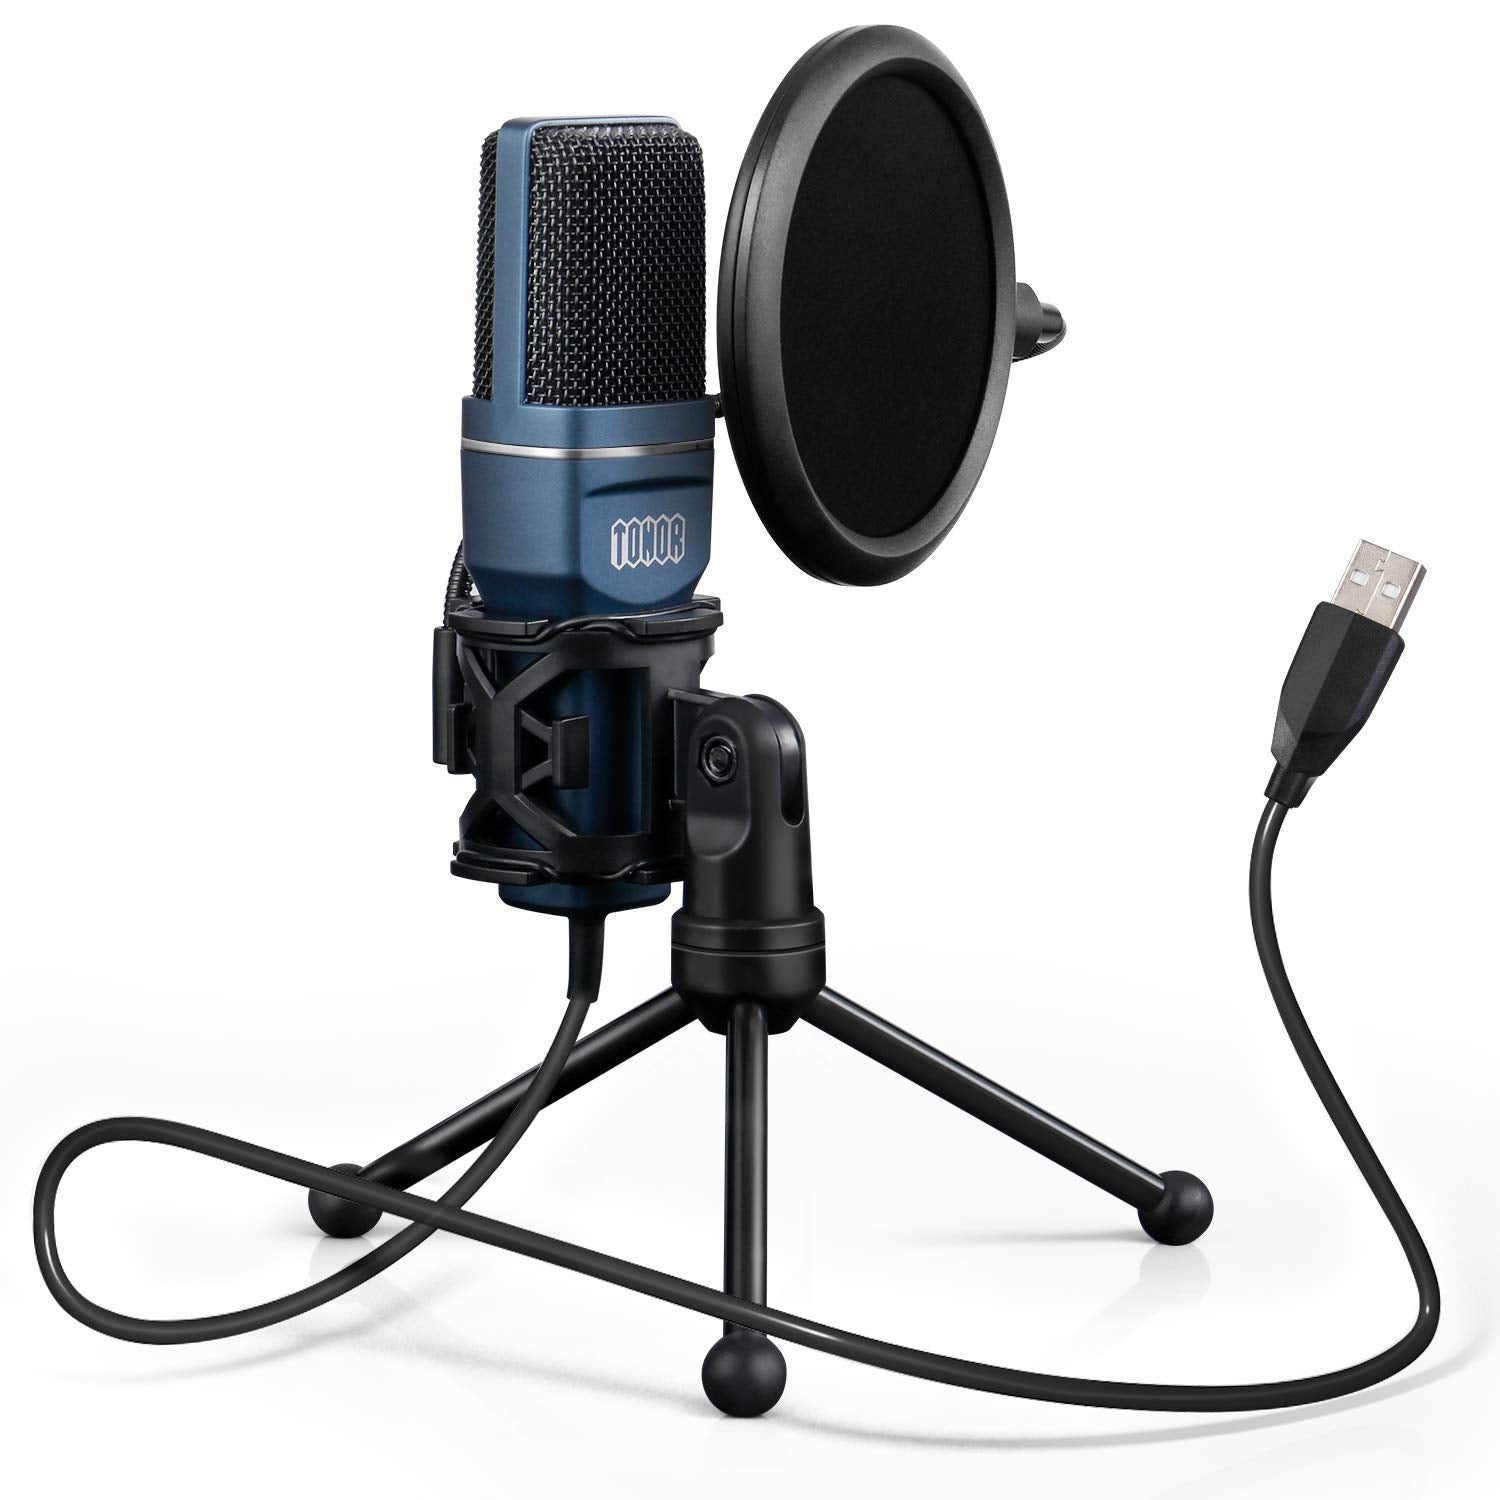 TONOR Conference USB Microphone for Computer PC, Omnidirectional Condenser  Laptop Mic for Video, Recording, Skype, Online Class, Court Reporter, Plug